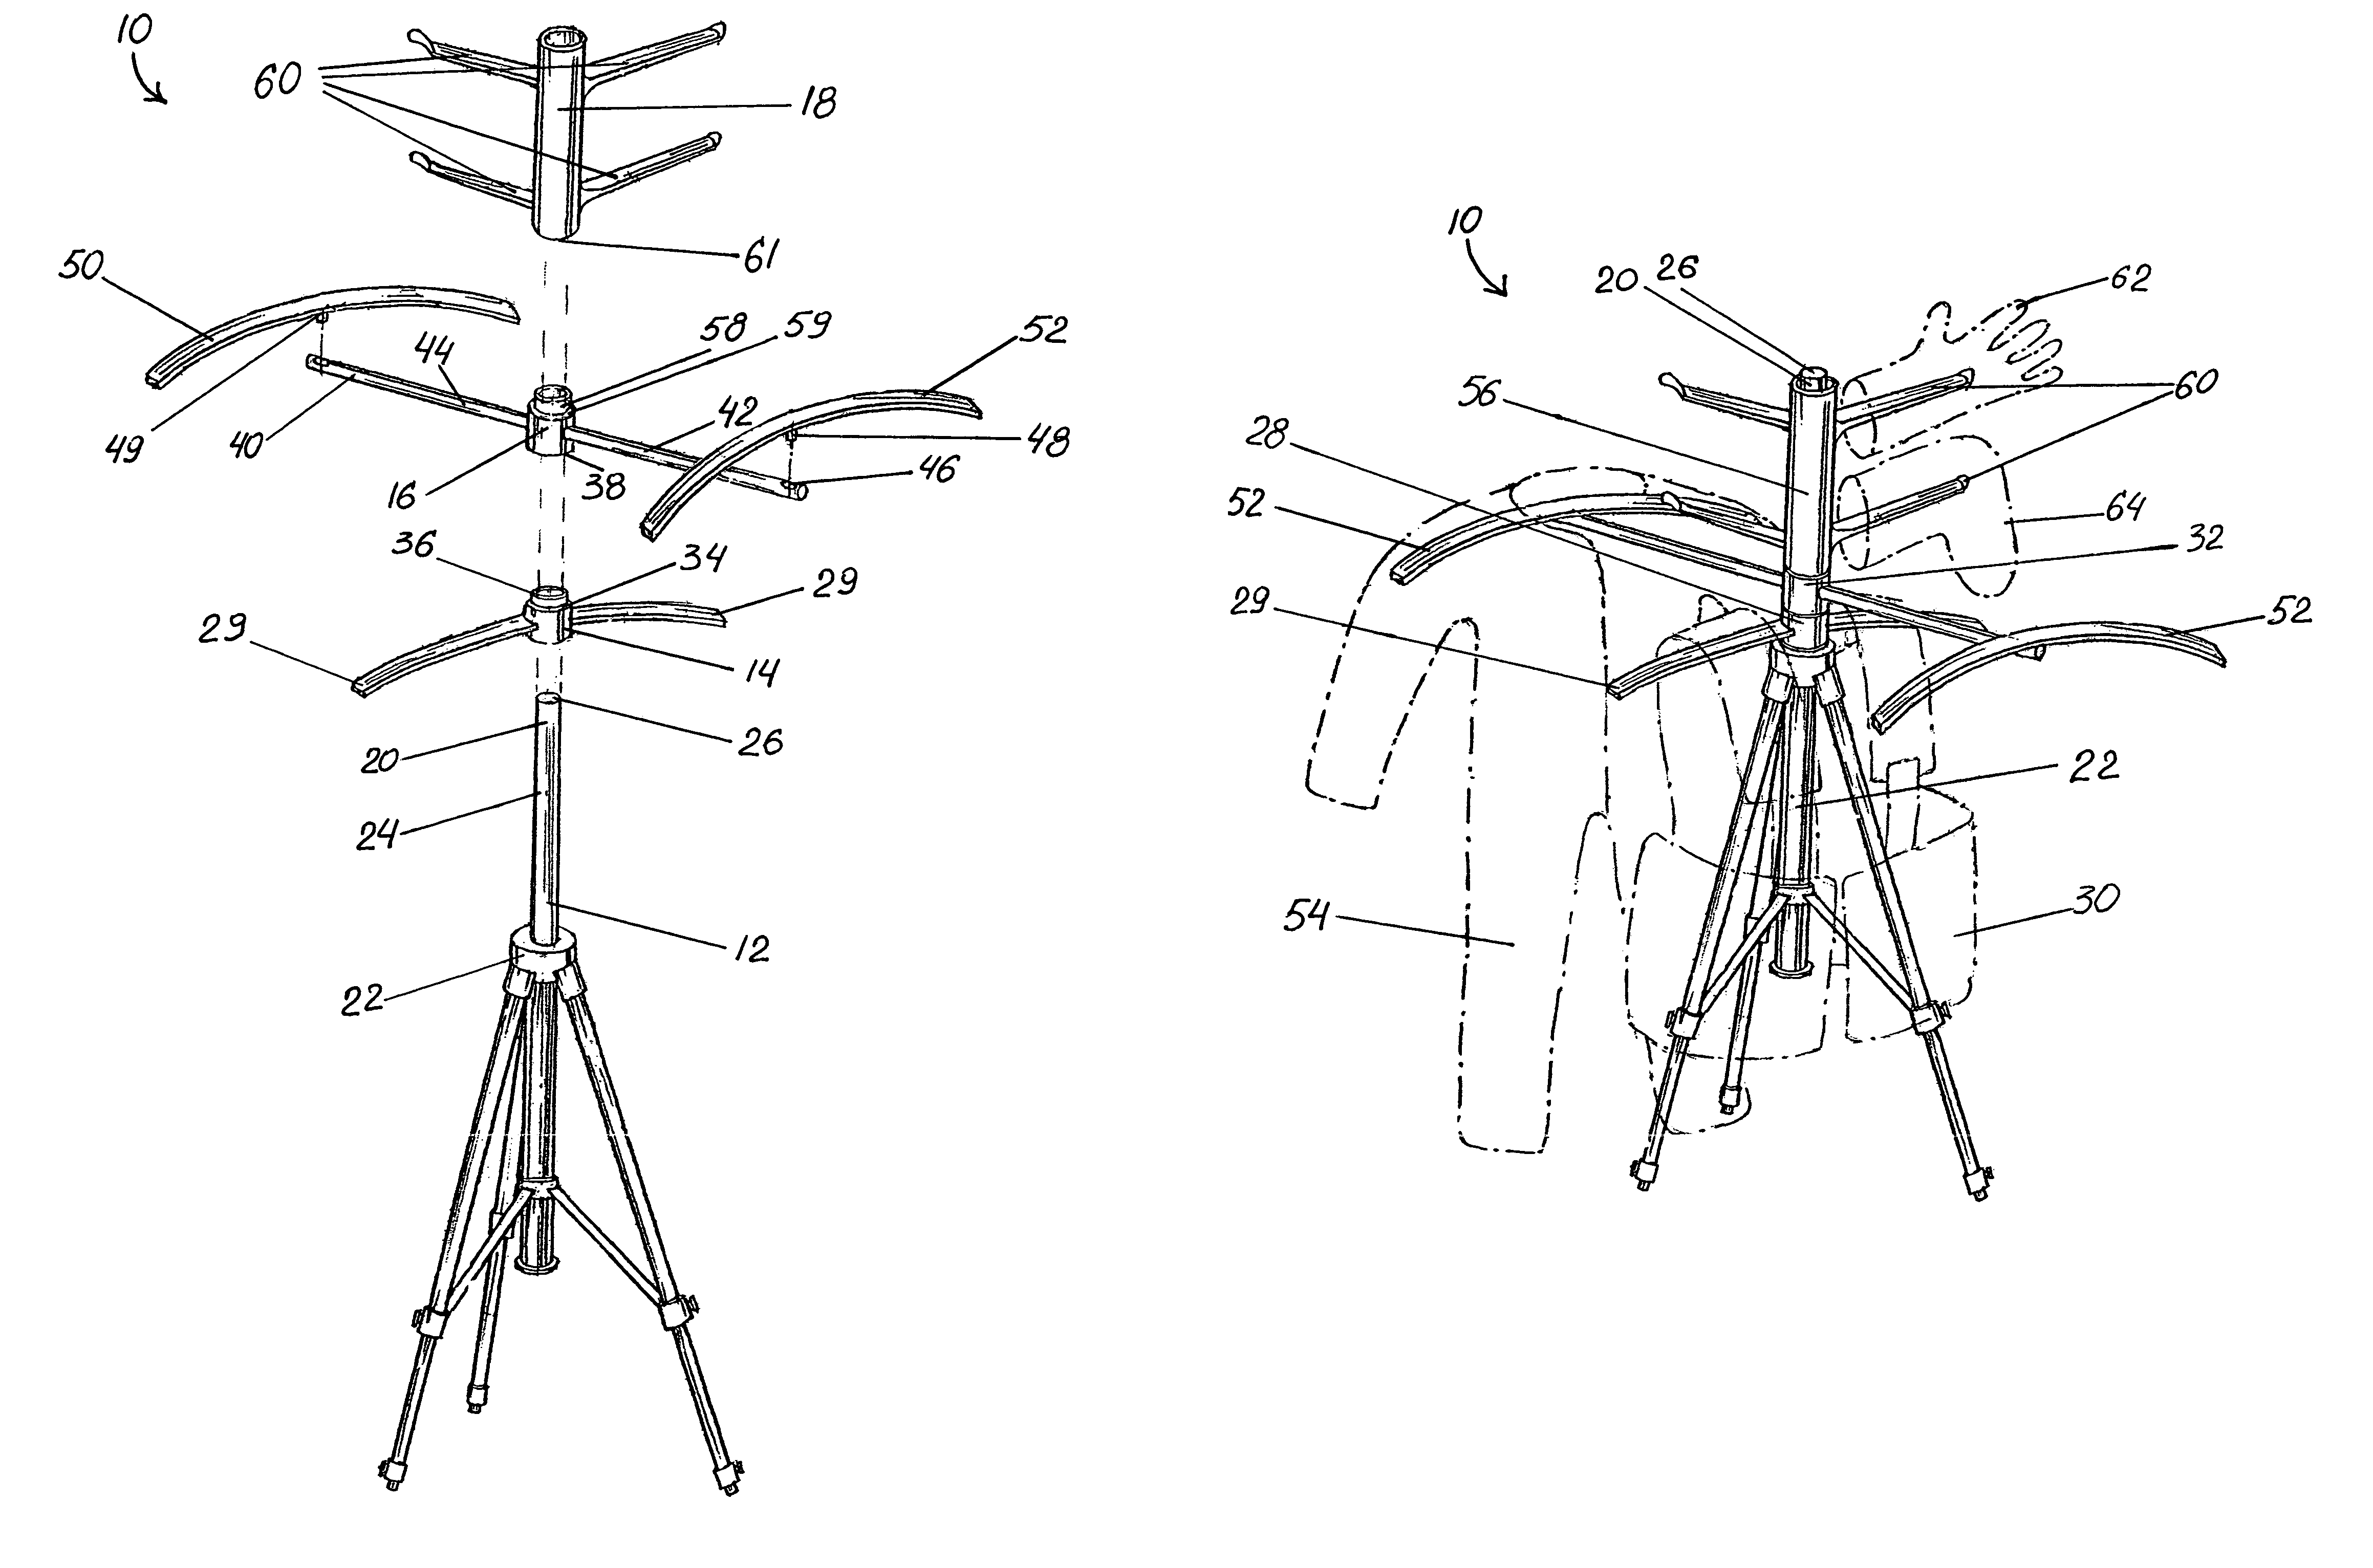 Apparatus for drying scuba diving gear